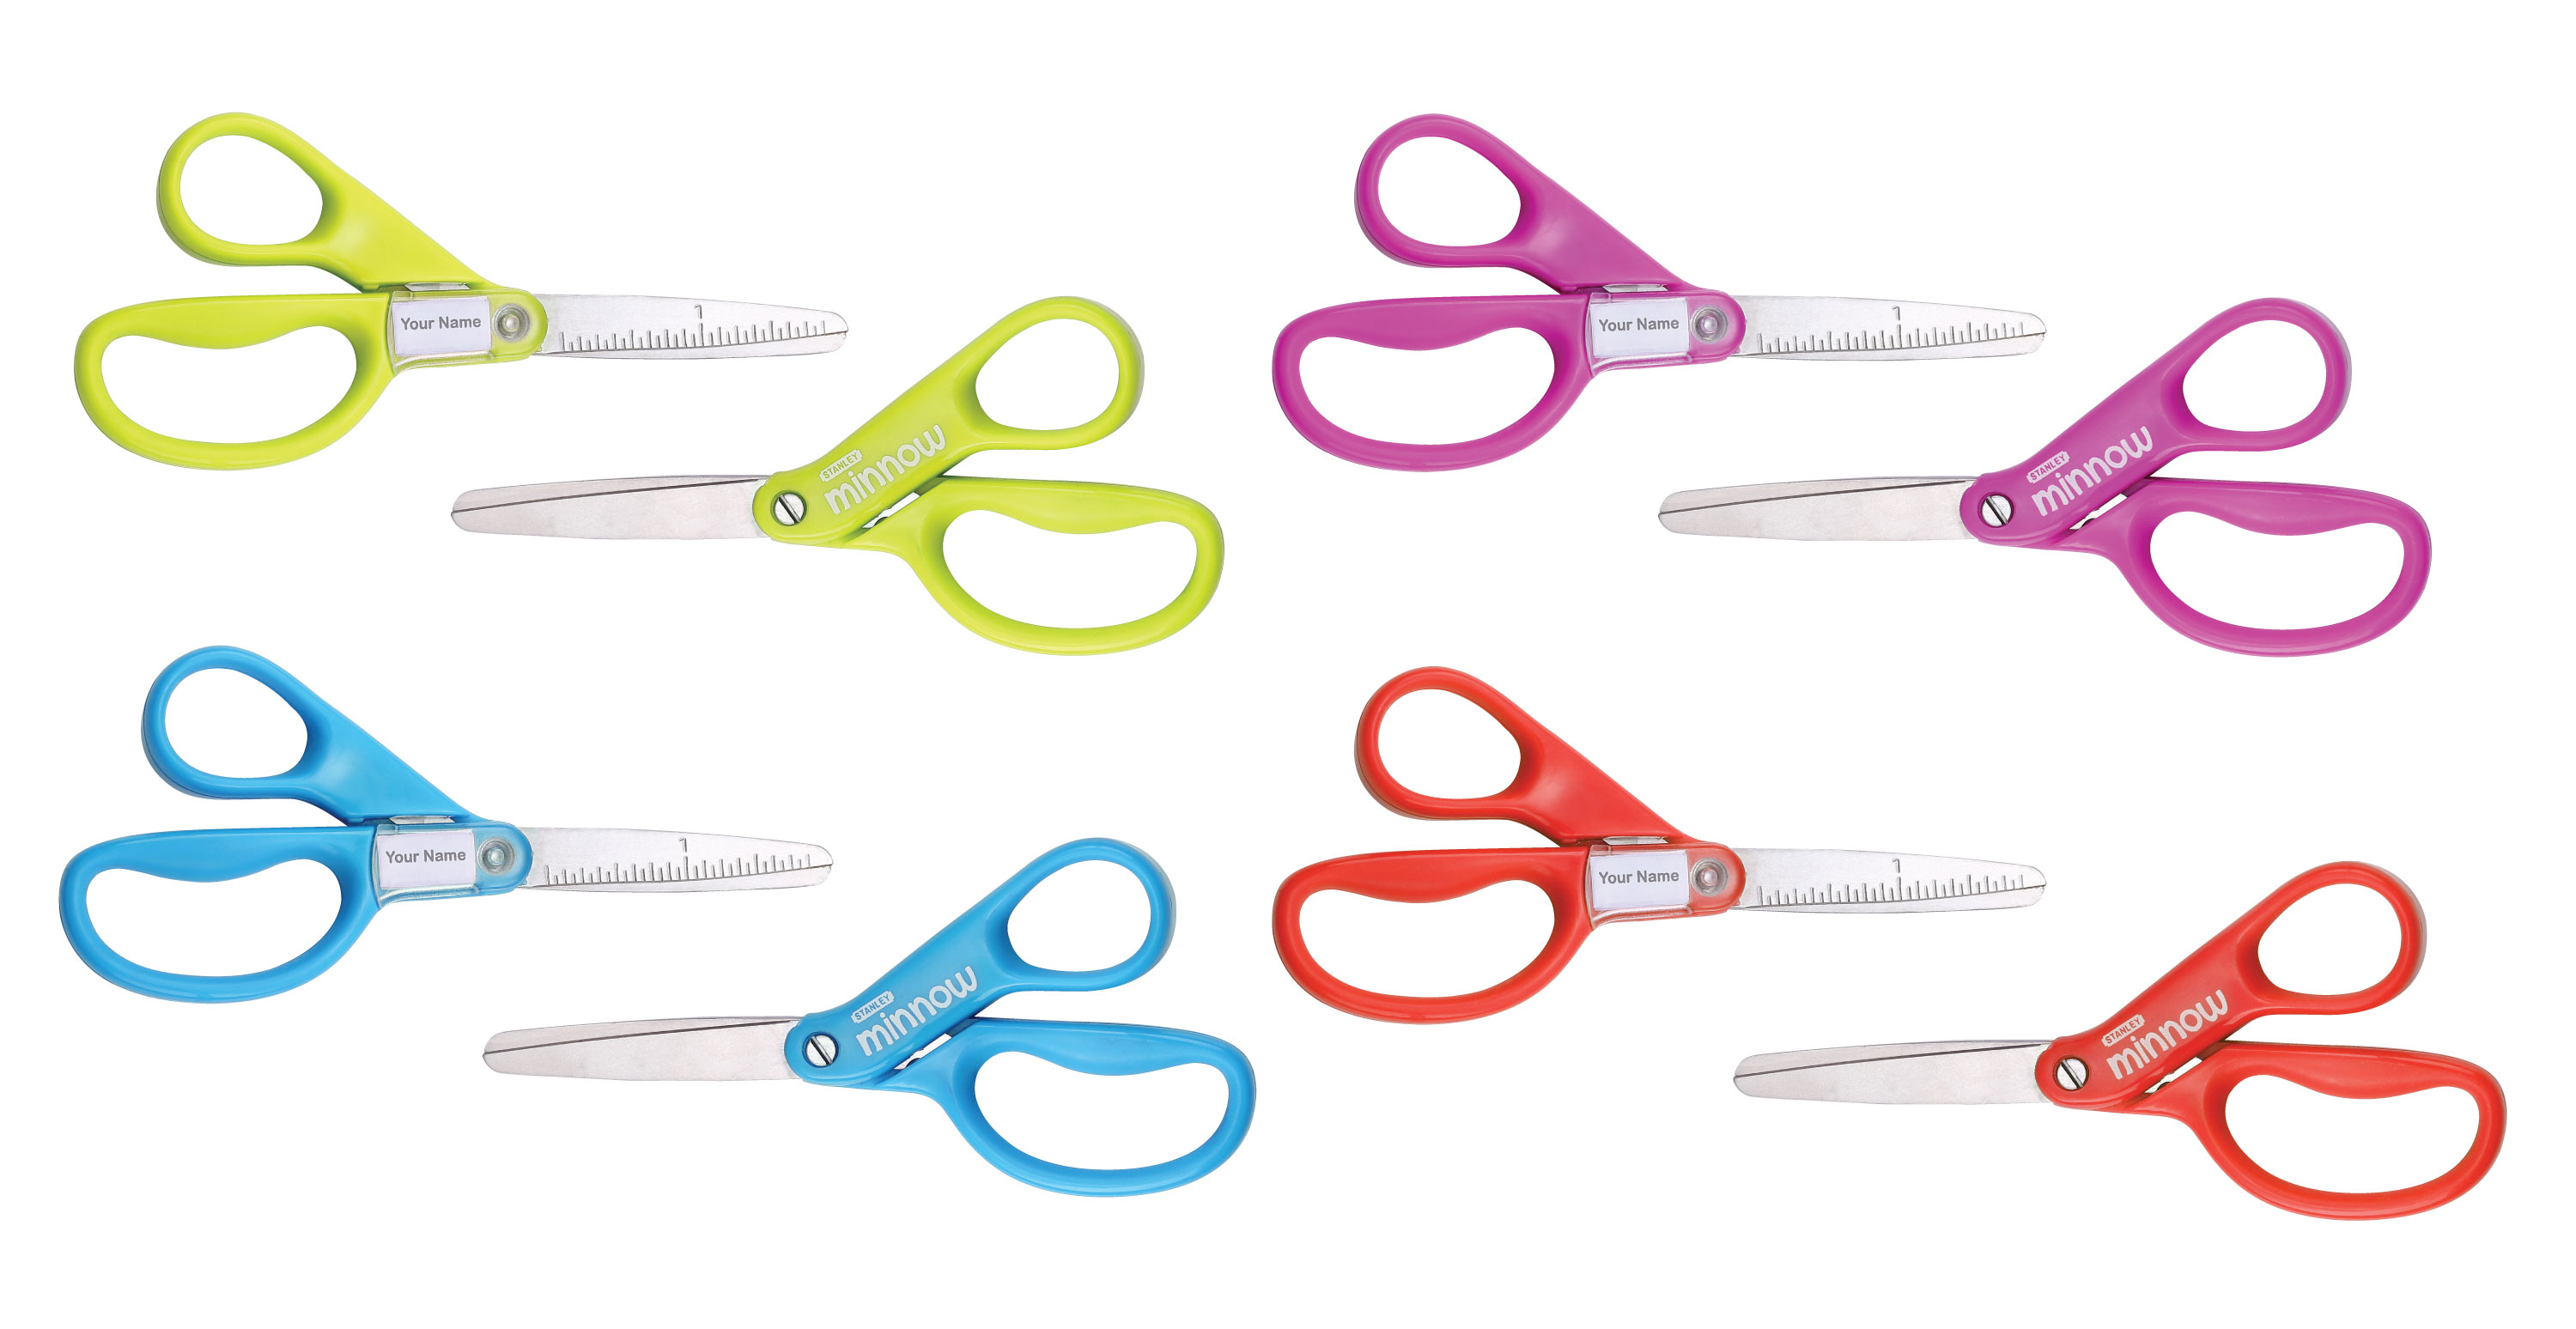 Stanley 5-inch Pointed Tip Minnow Kids Scissors, 8-Pack, Assorted Colors - image 1 of 15